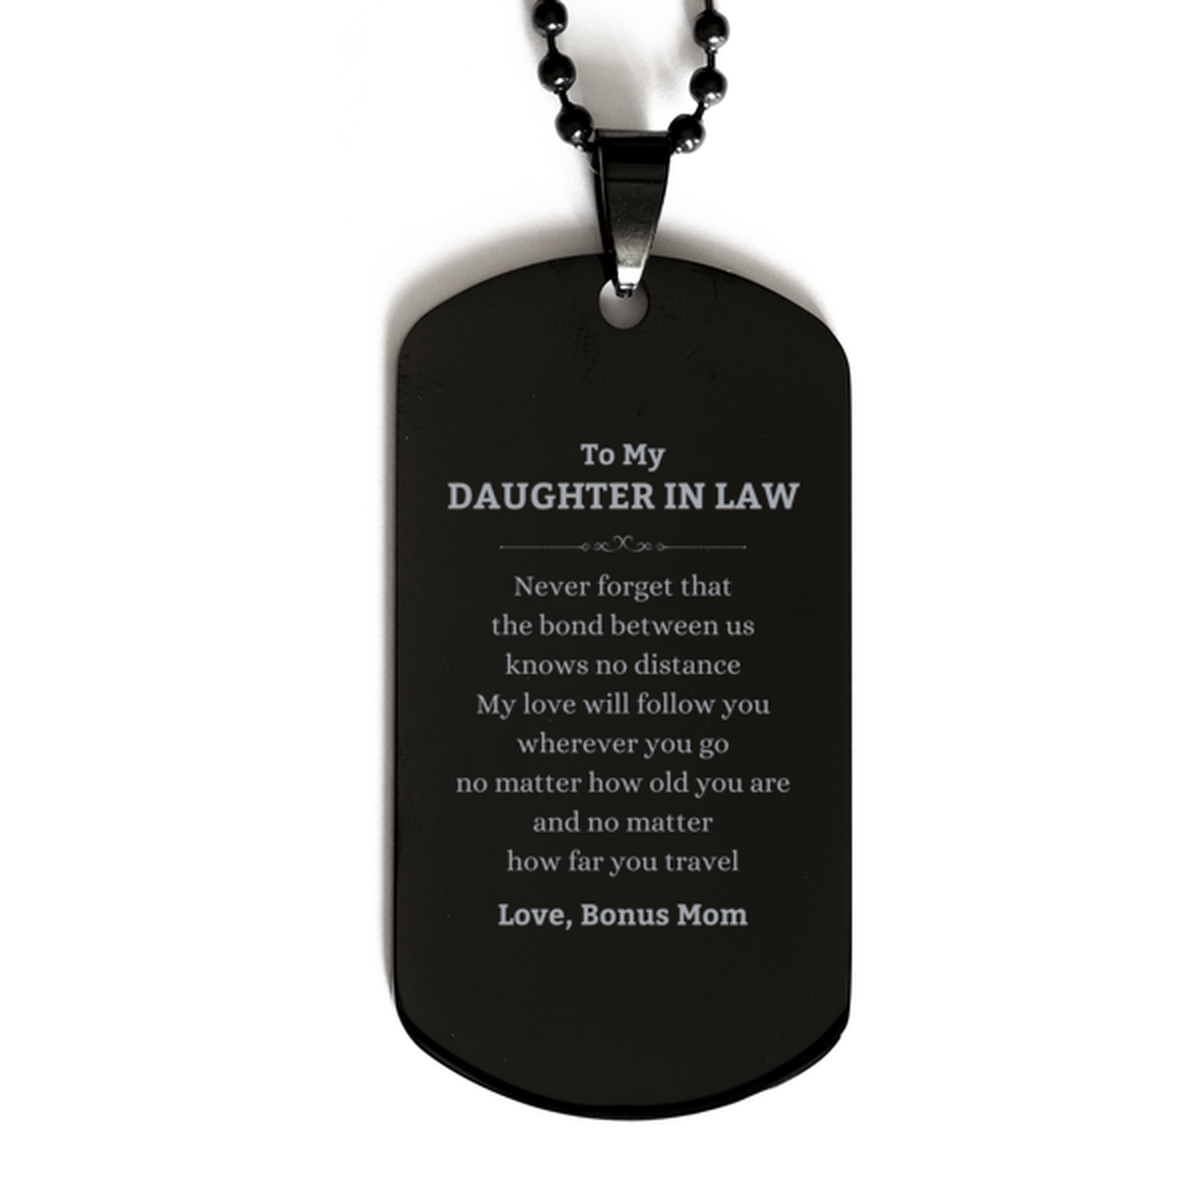 Daughter In Law Birthday Gifts from Bonus Mom, Adjustable Black Dog Tag for Daughter In Law Christmas Graduation Unique Gifts Daughter In Law Never forget that the bond between us knows no distance. Love, Bonus Mom